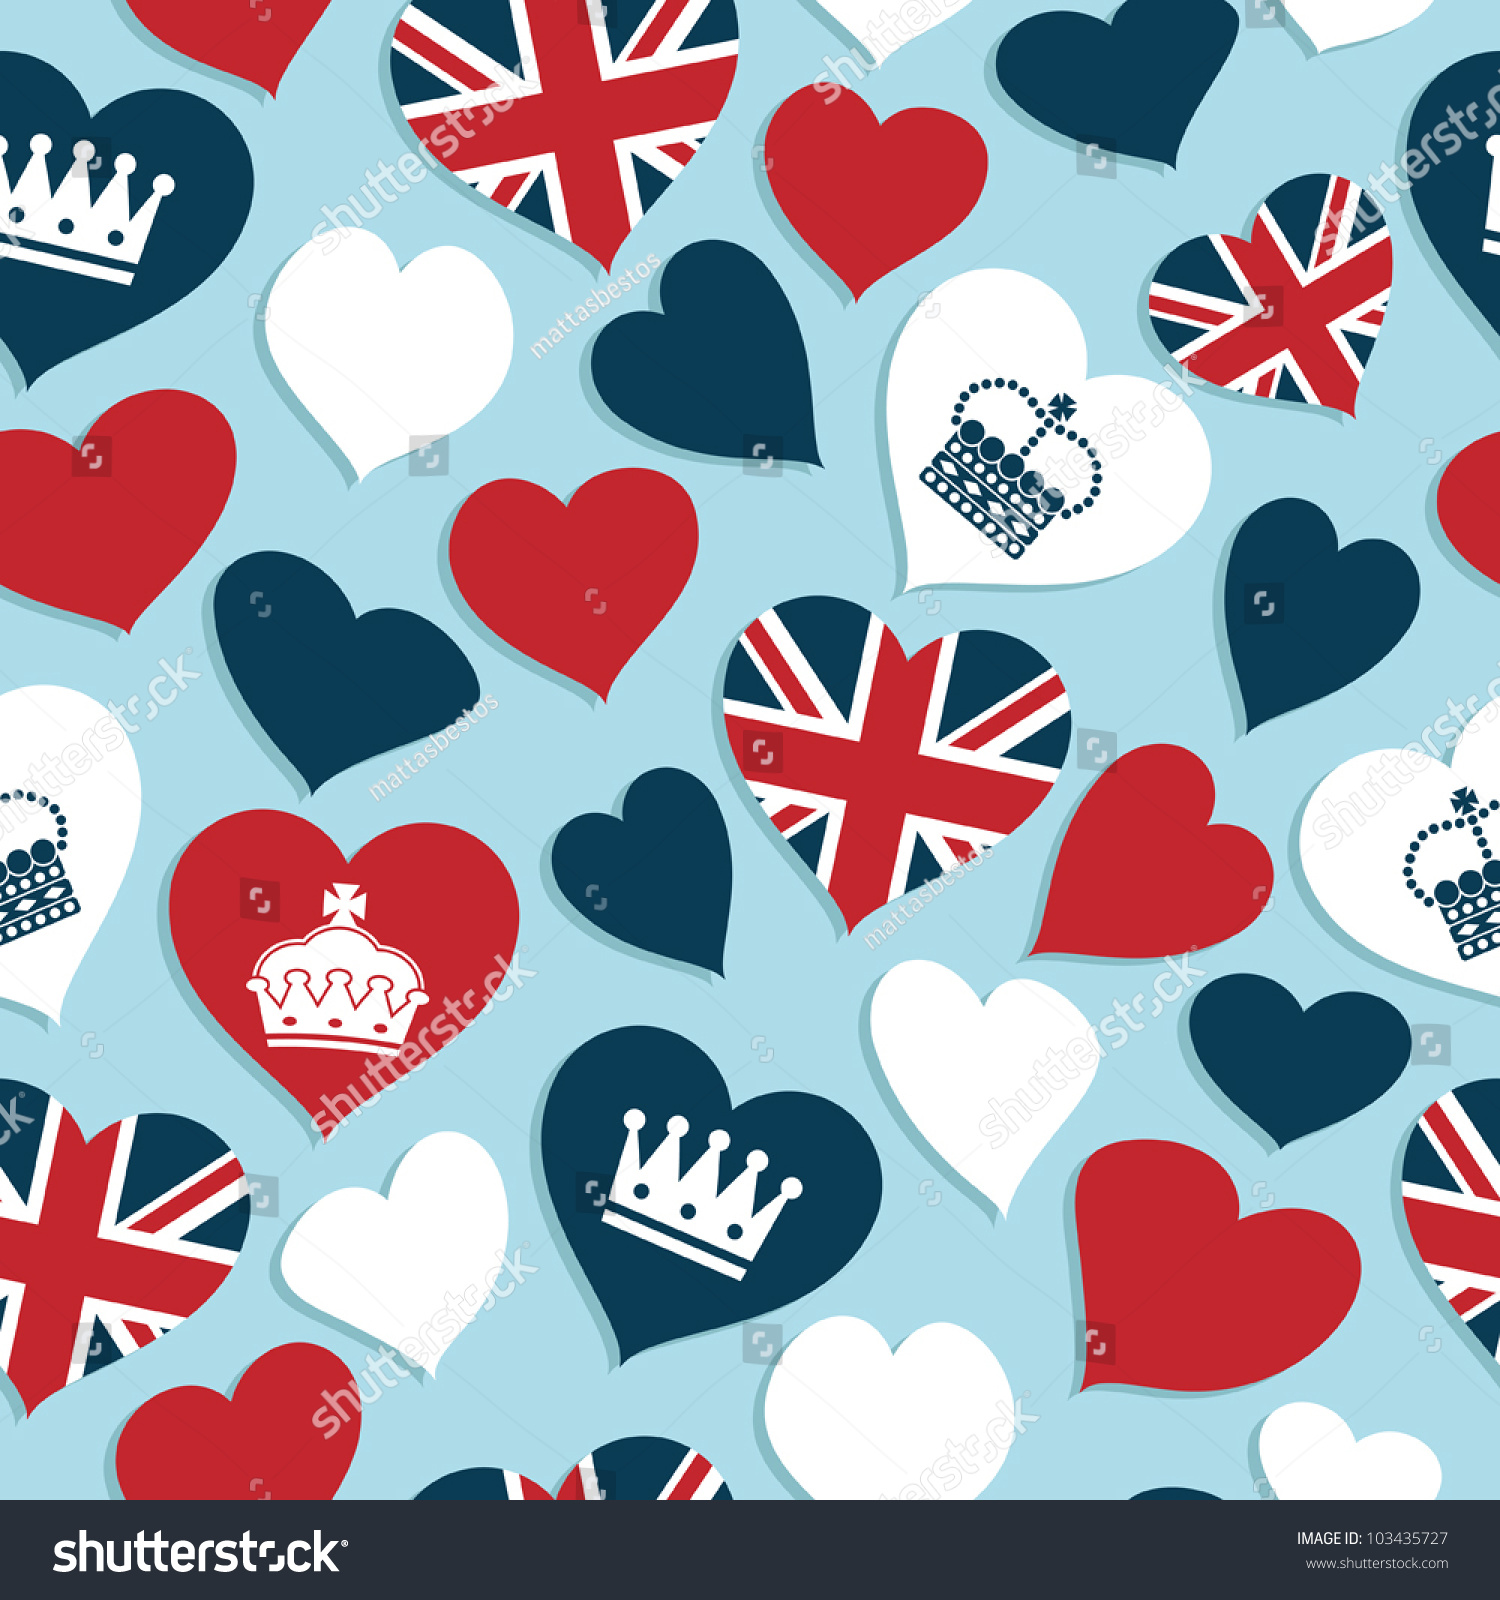 SVG of seamless pattern of red, white and blue union jack and crown hearts, with clipping path svg